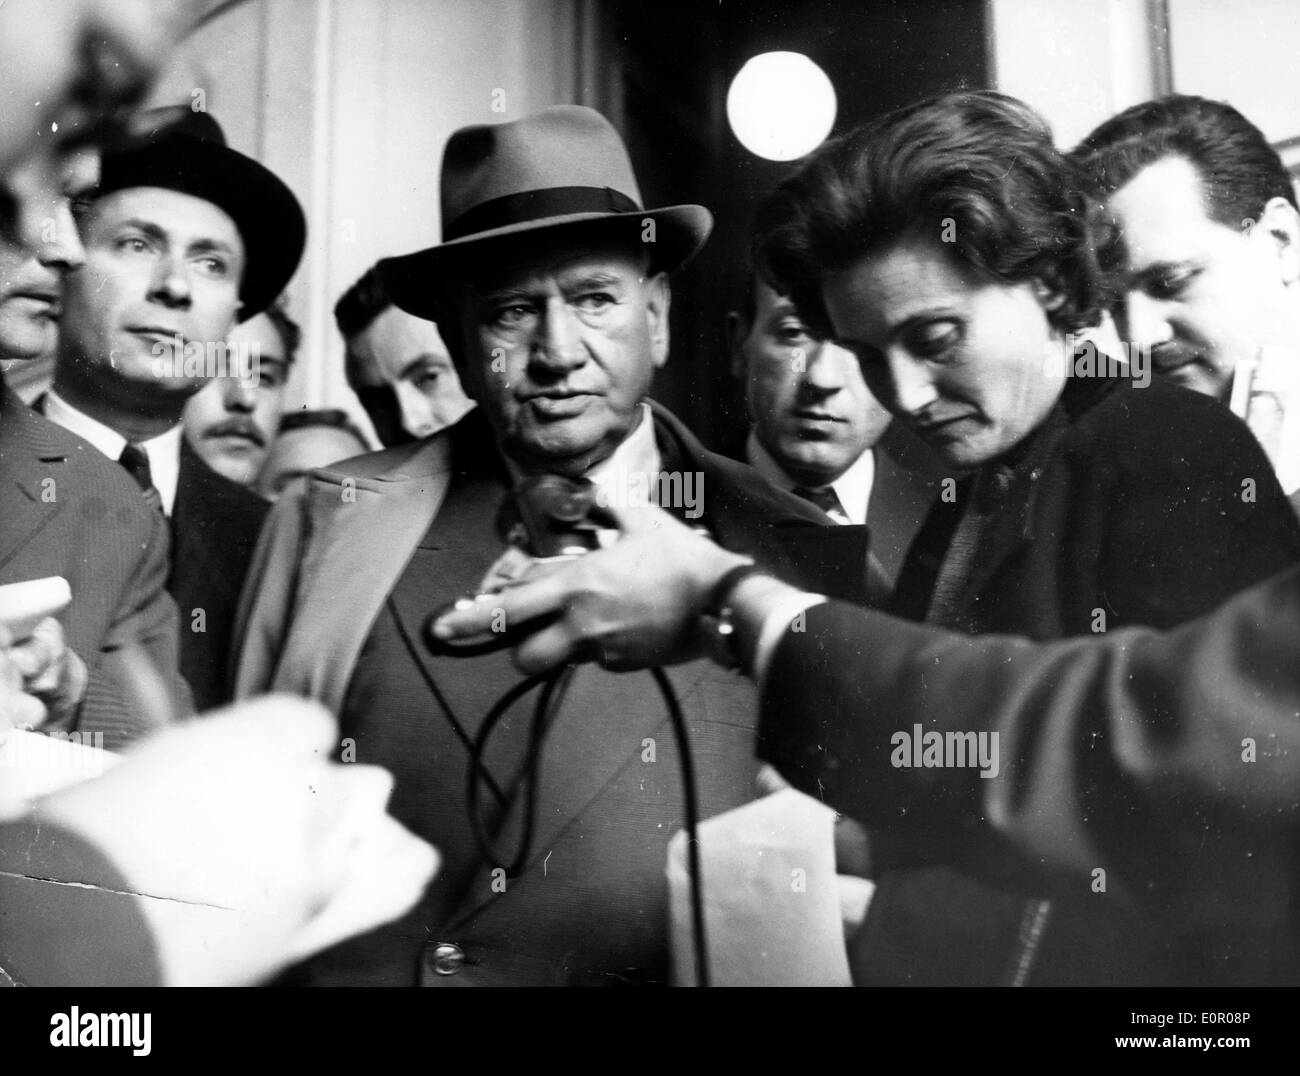 May 27, 1957 - Paris, France - (File Photo) EDOUARD DALADIER was a French Radical-Socialist politician, and Prime Minister of Stock Photo